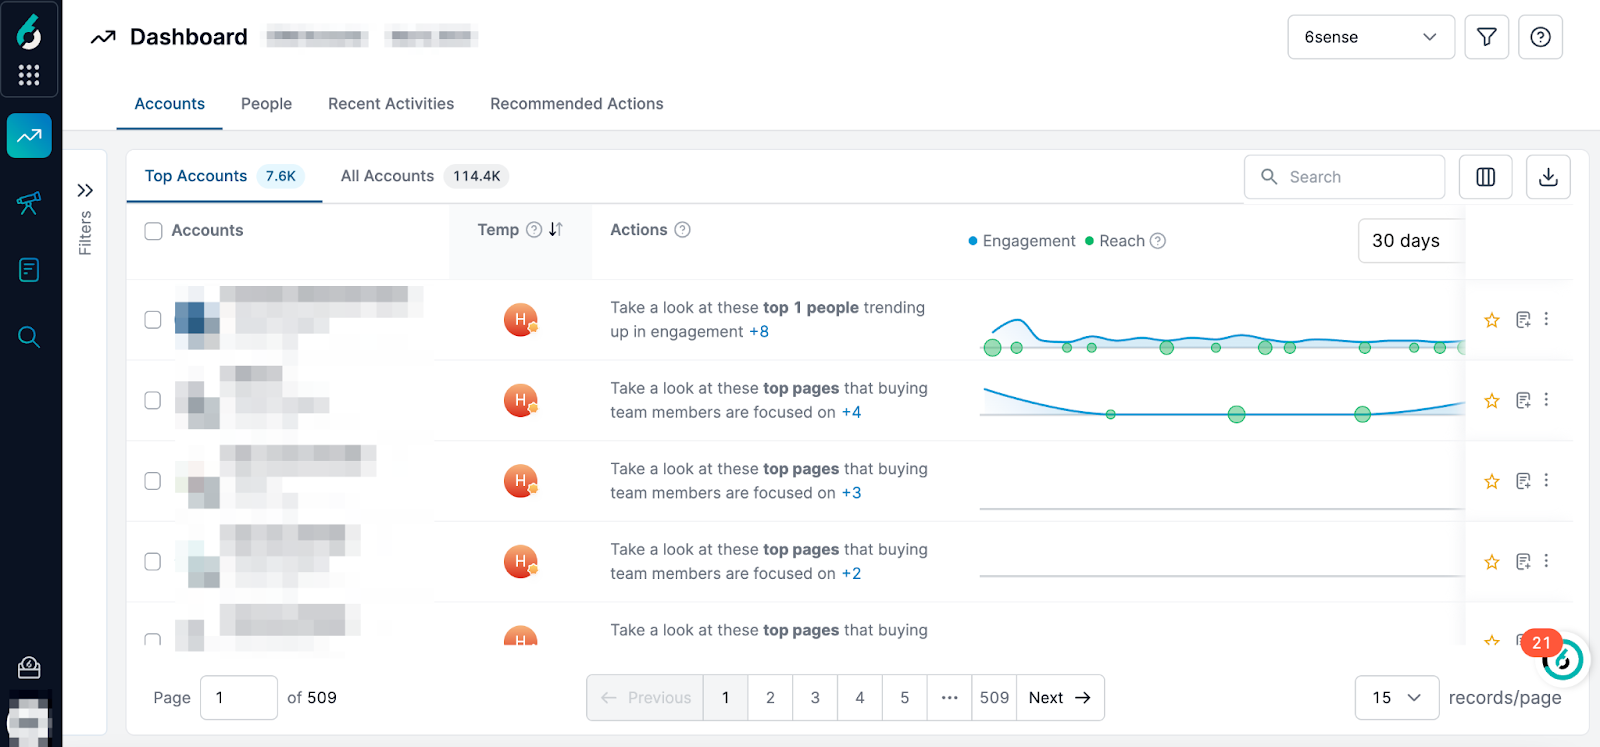 The 6sense Revenue AI for Sales dashboard shows a list of accounts, a temperature gauge to help you prioritize, actions sellers can take to develop talking points, and a timeline with details about account engagement.